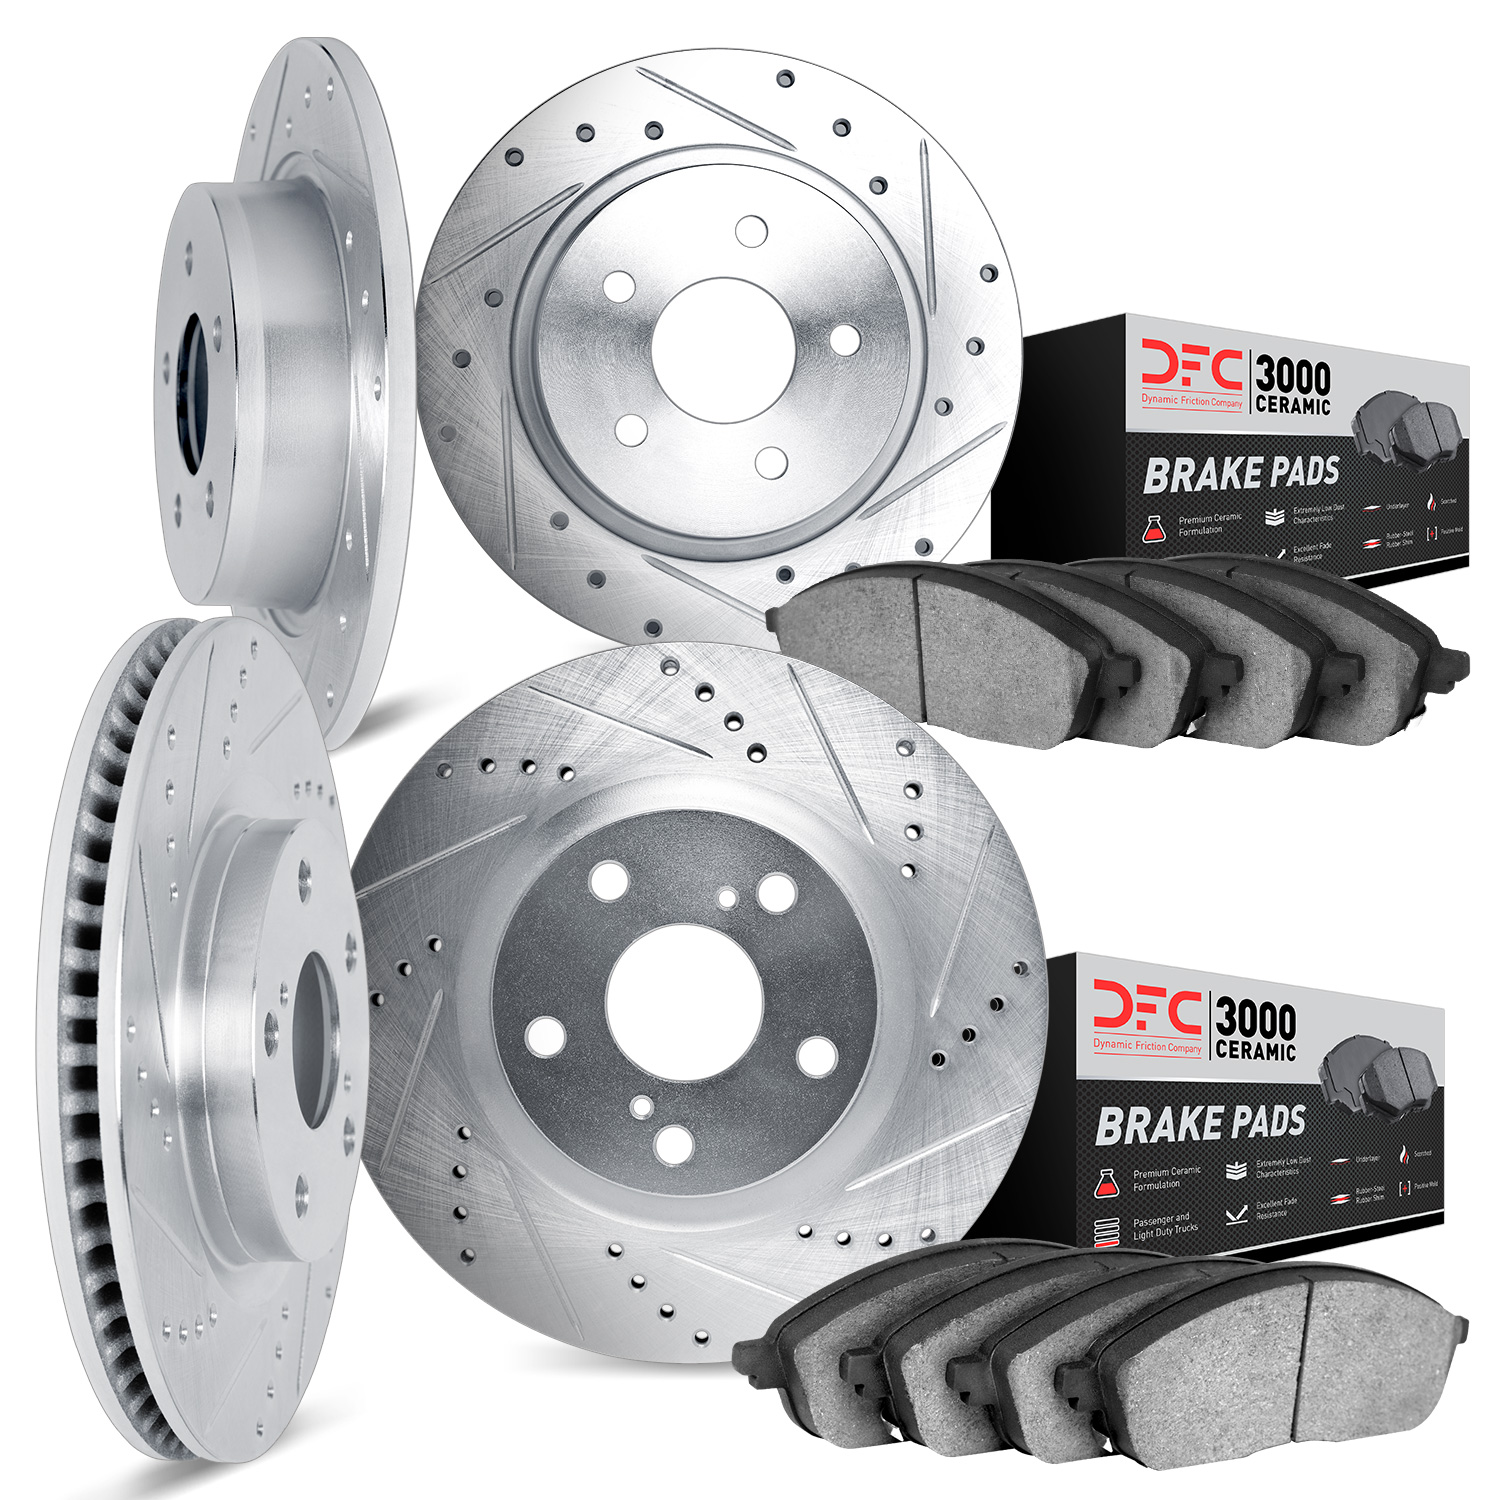 7304-54071 Drilled/Slotted Brake Rotor with 3000-Series Ceramic Brake Pads Kit [Silver], 2012-2018 Ford/Lincoln/Mercury/Mazda, P